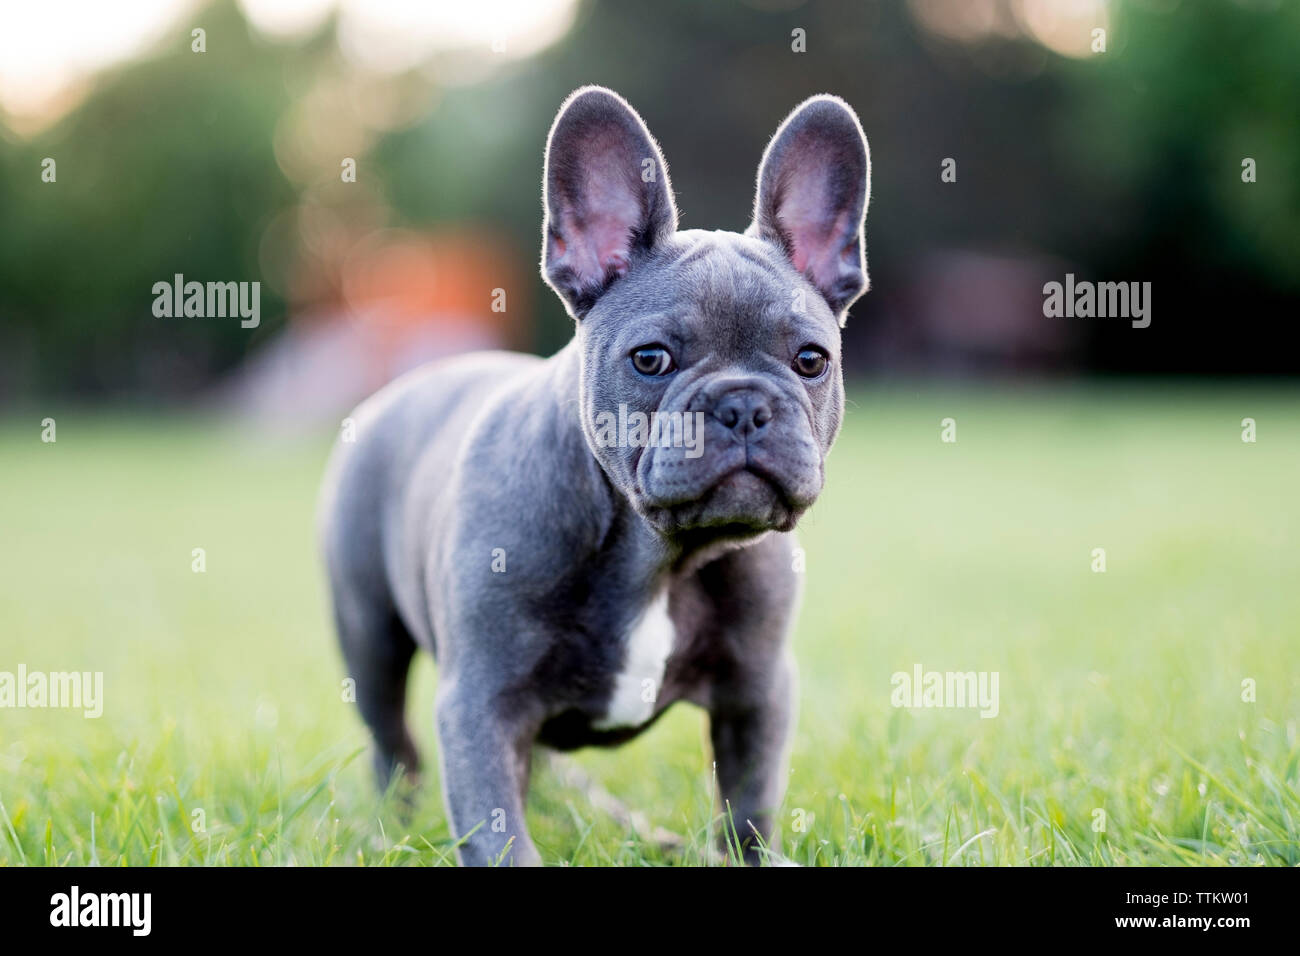 Close-up portrait of French Bulldog standing on grassy field Stock Photo